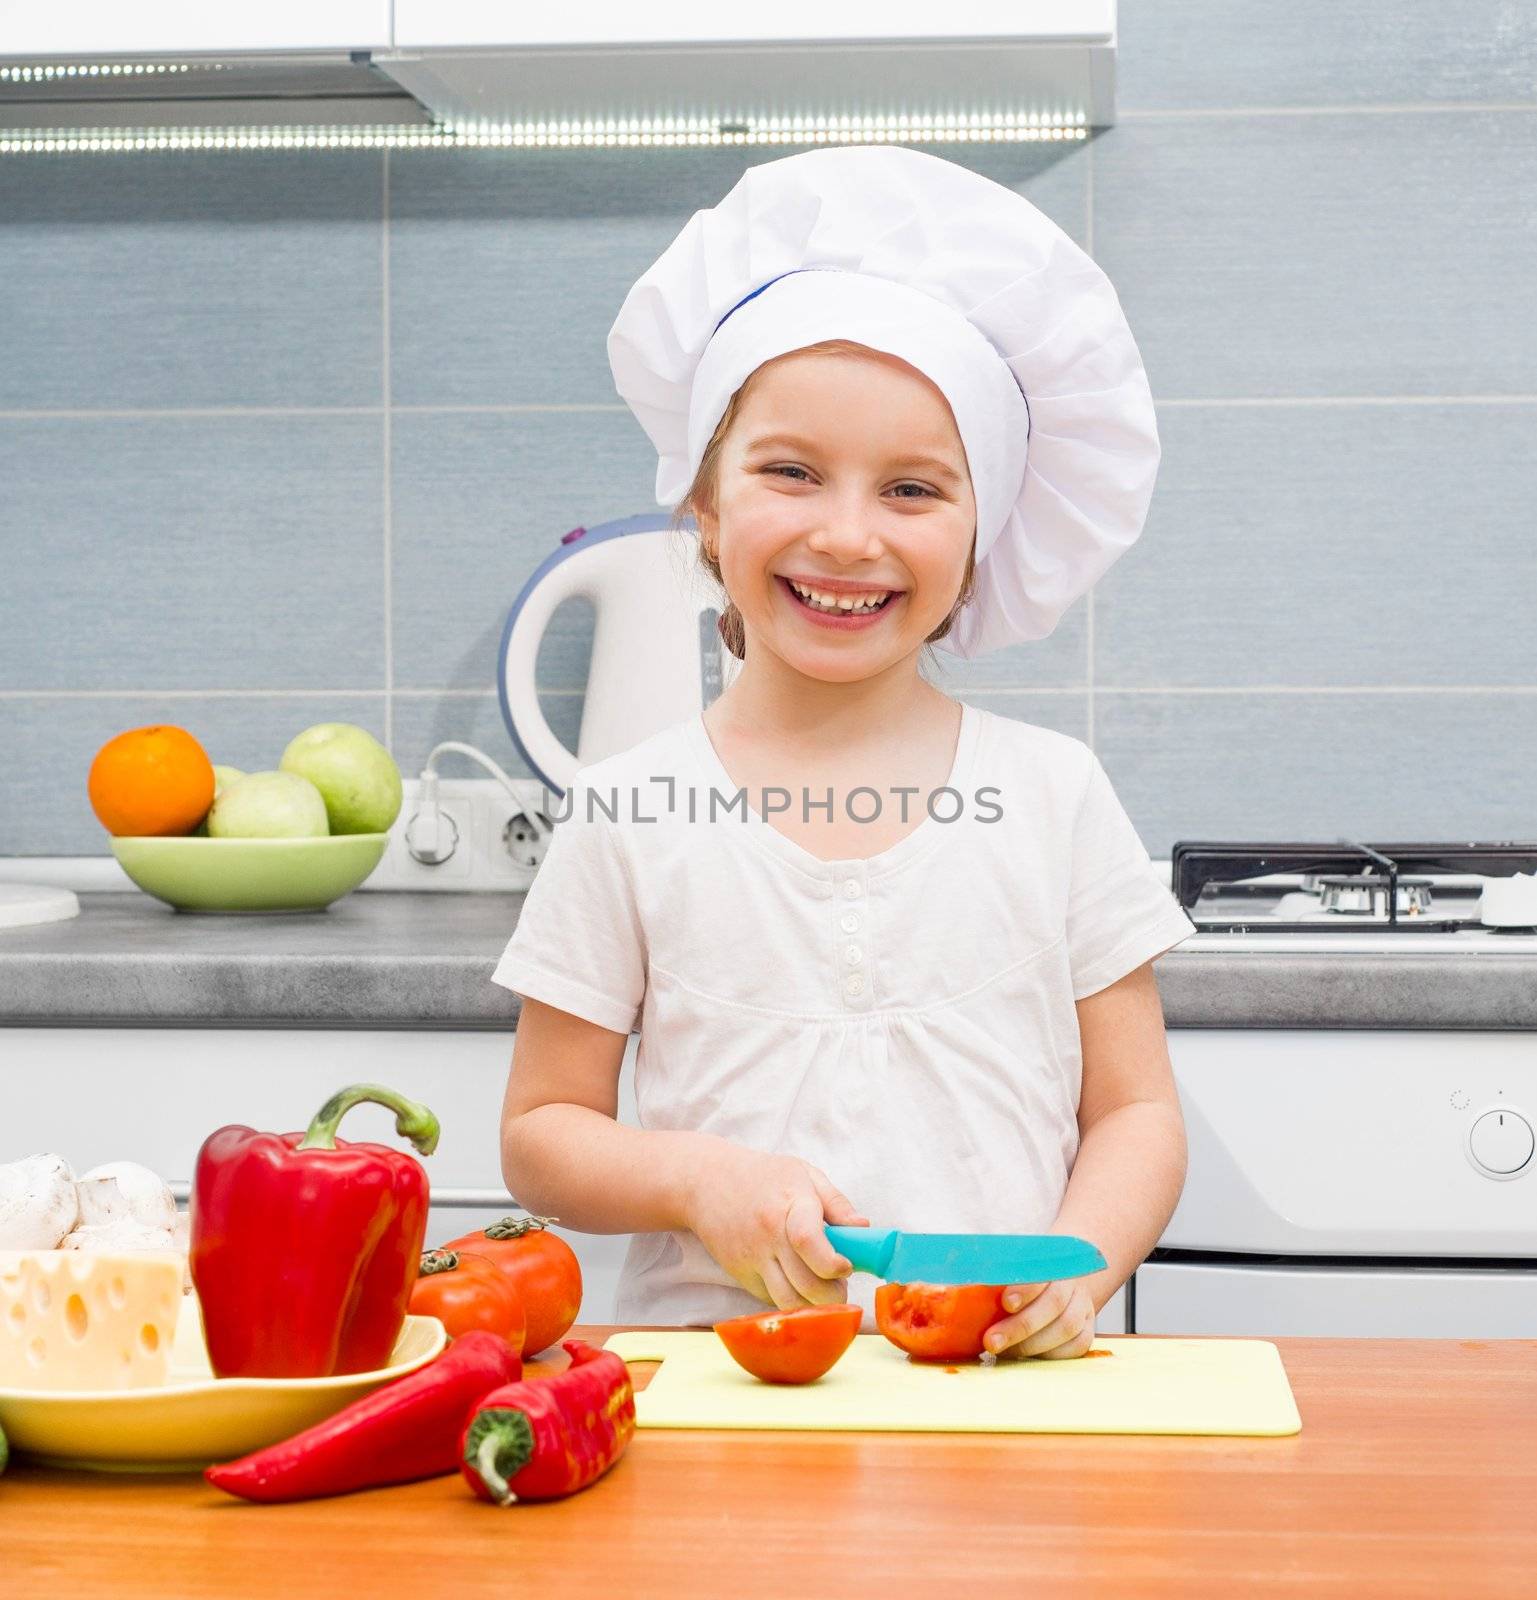 little girl in a cap chef in the kitchen cutting tomatoes